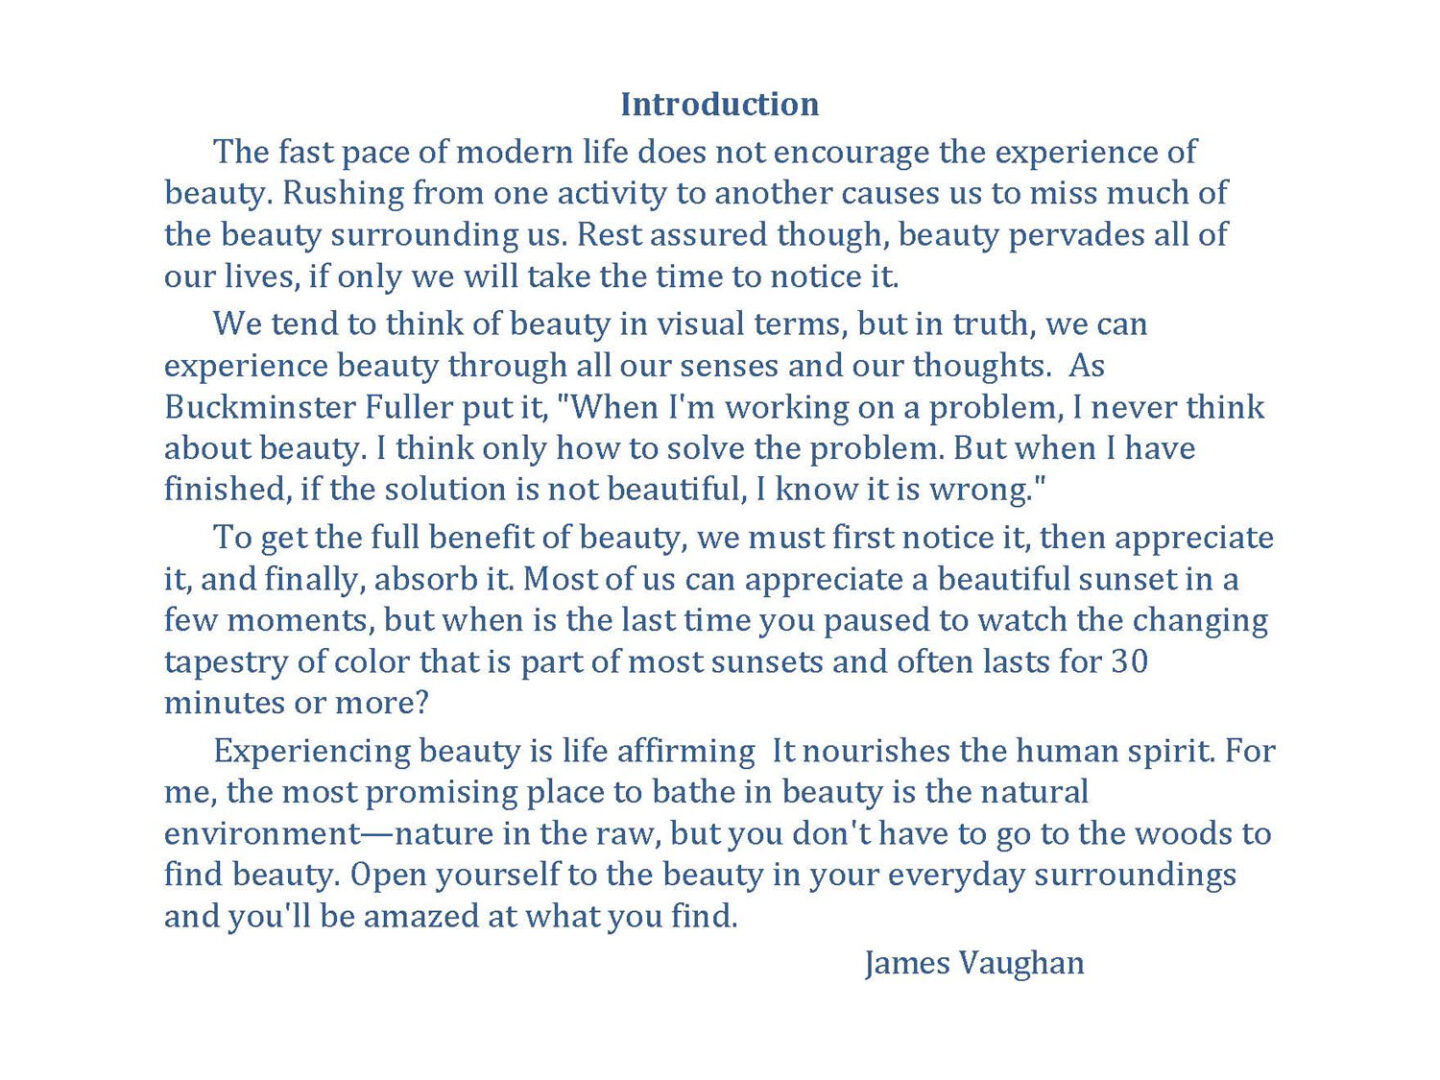 Reflections on Things that Matter by James Vaughan